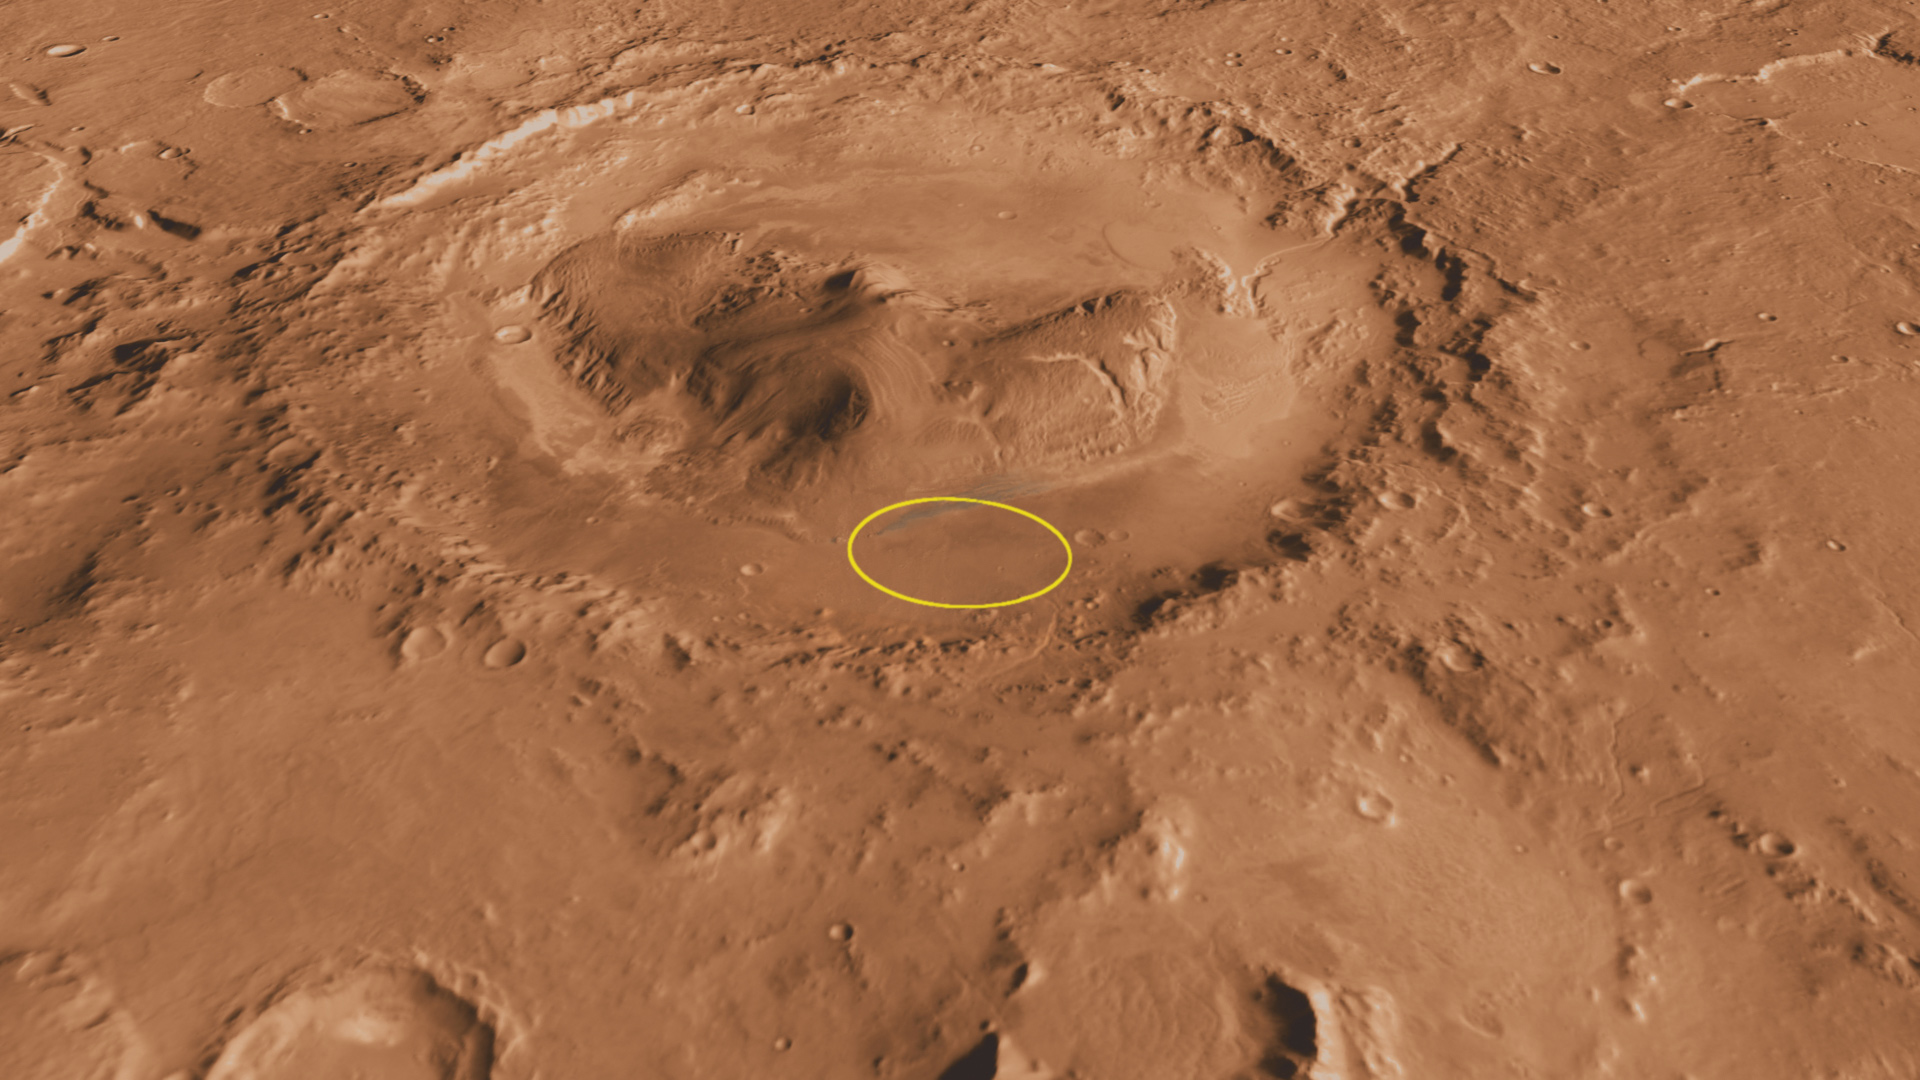 Context of Curiosity Landing Site in Gale Crater, with Ellipse